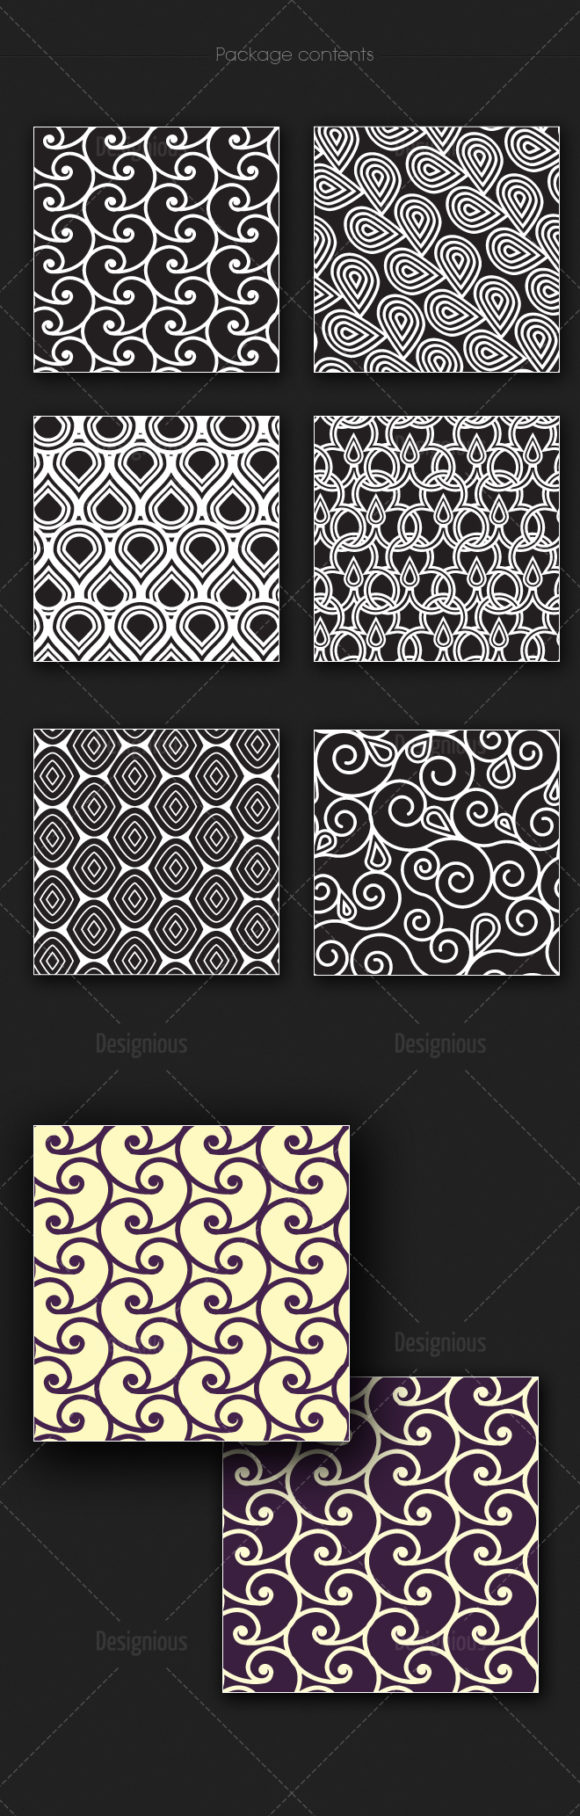 Seamless Patterns Vector Pack 173 2